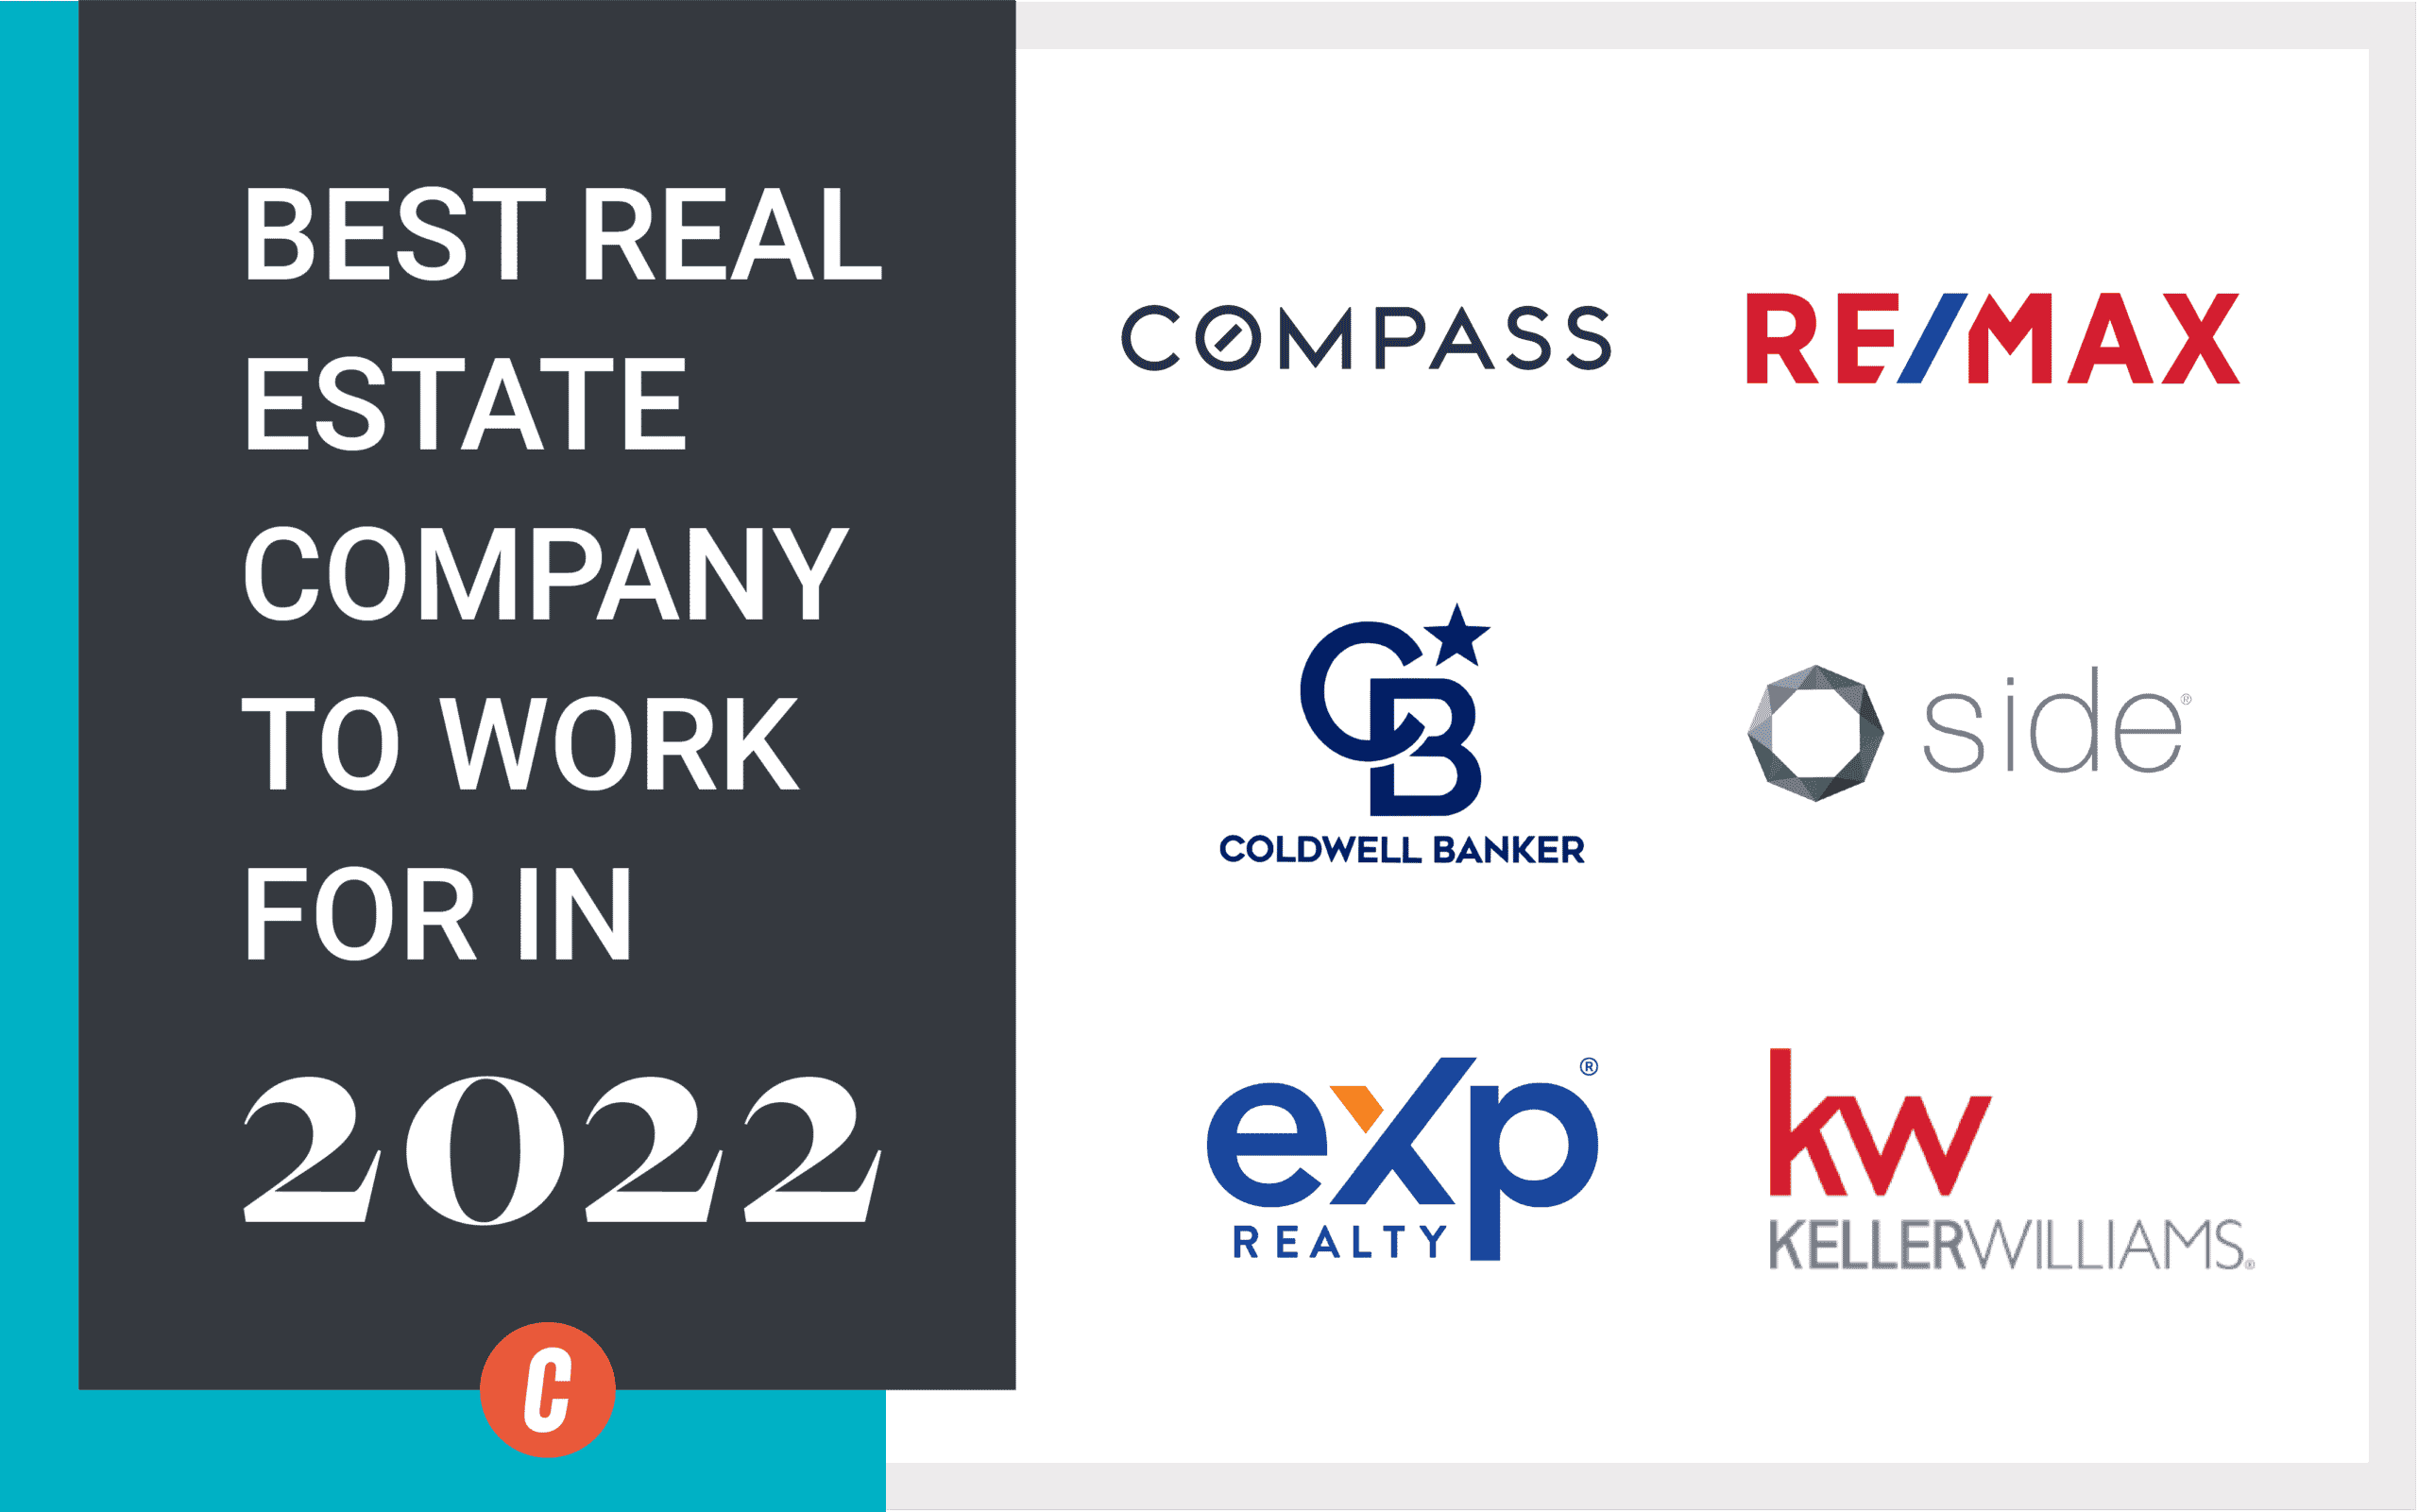 What’s the Best Real Estate Company to Work for in 2022?